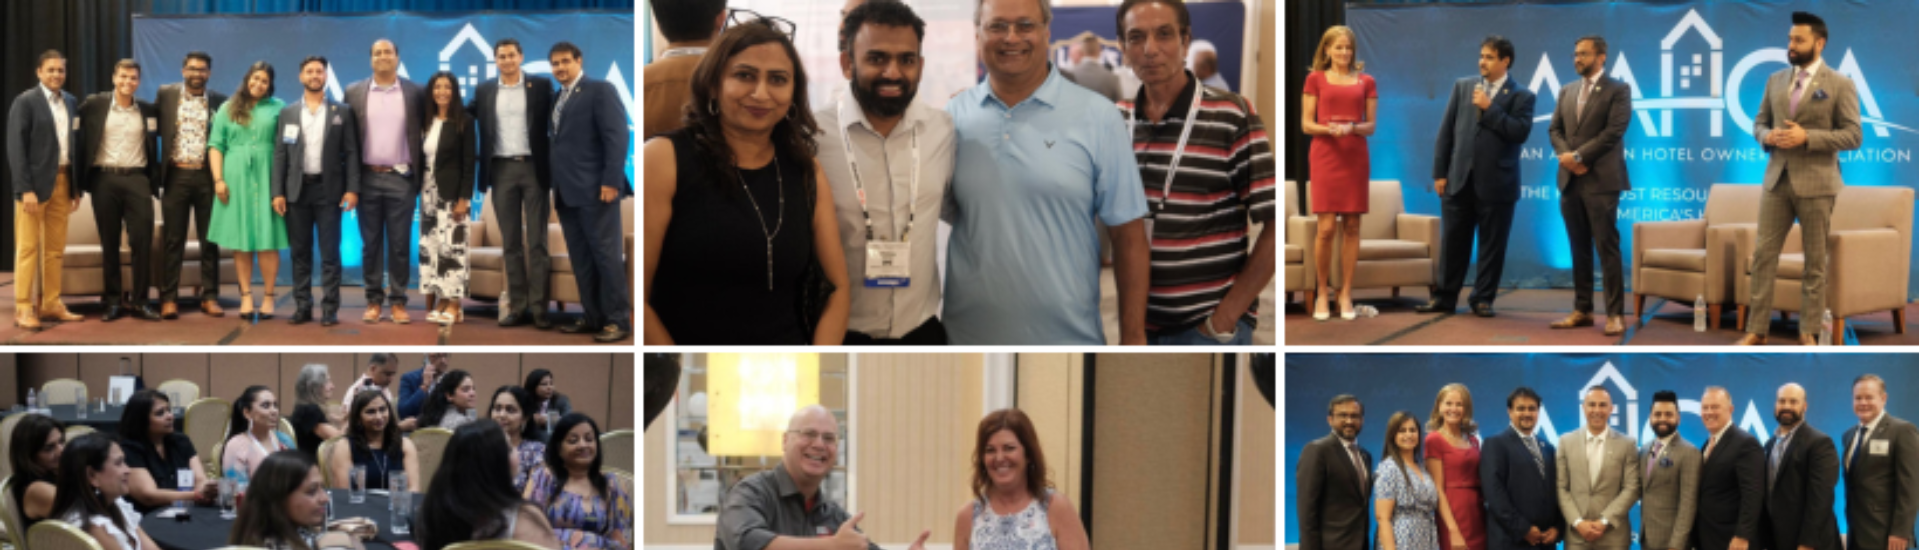 Turbocharged Success: AAHOA North Central Hotel Owners Conference and Trade Show Recap